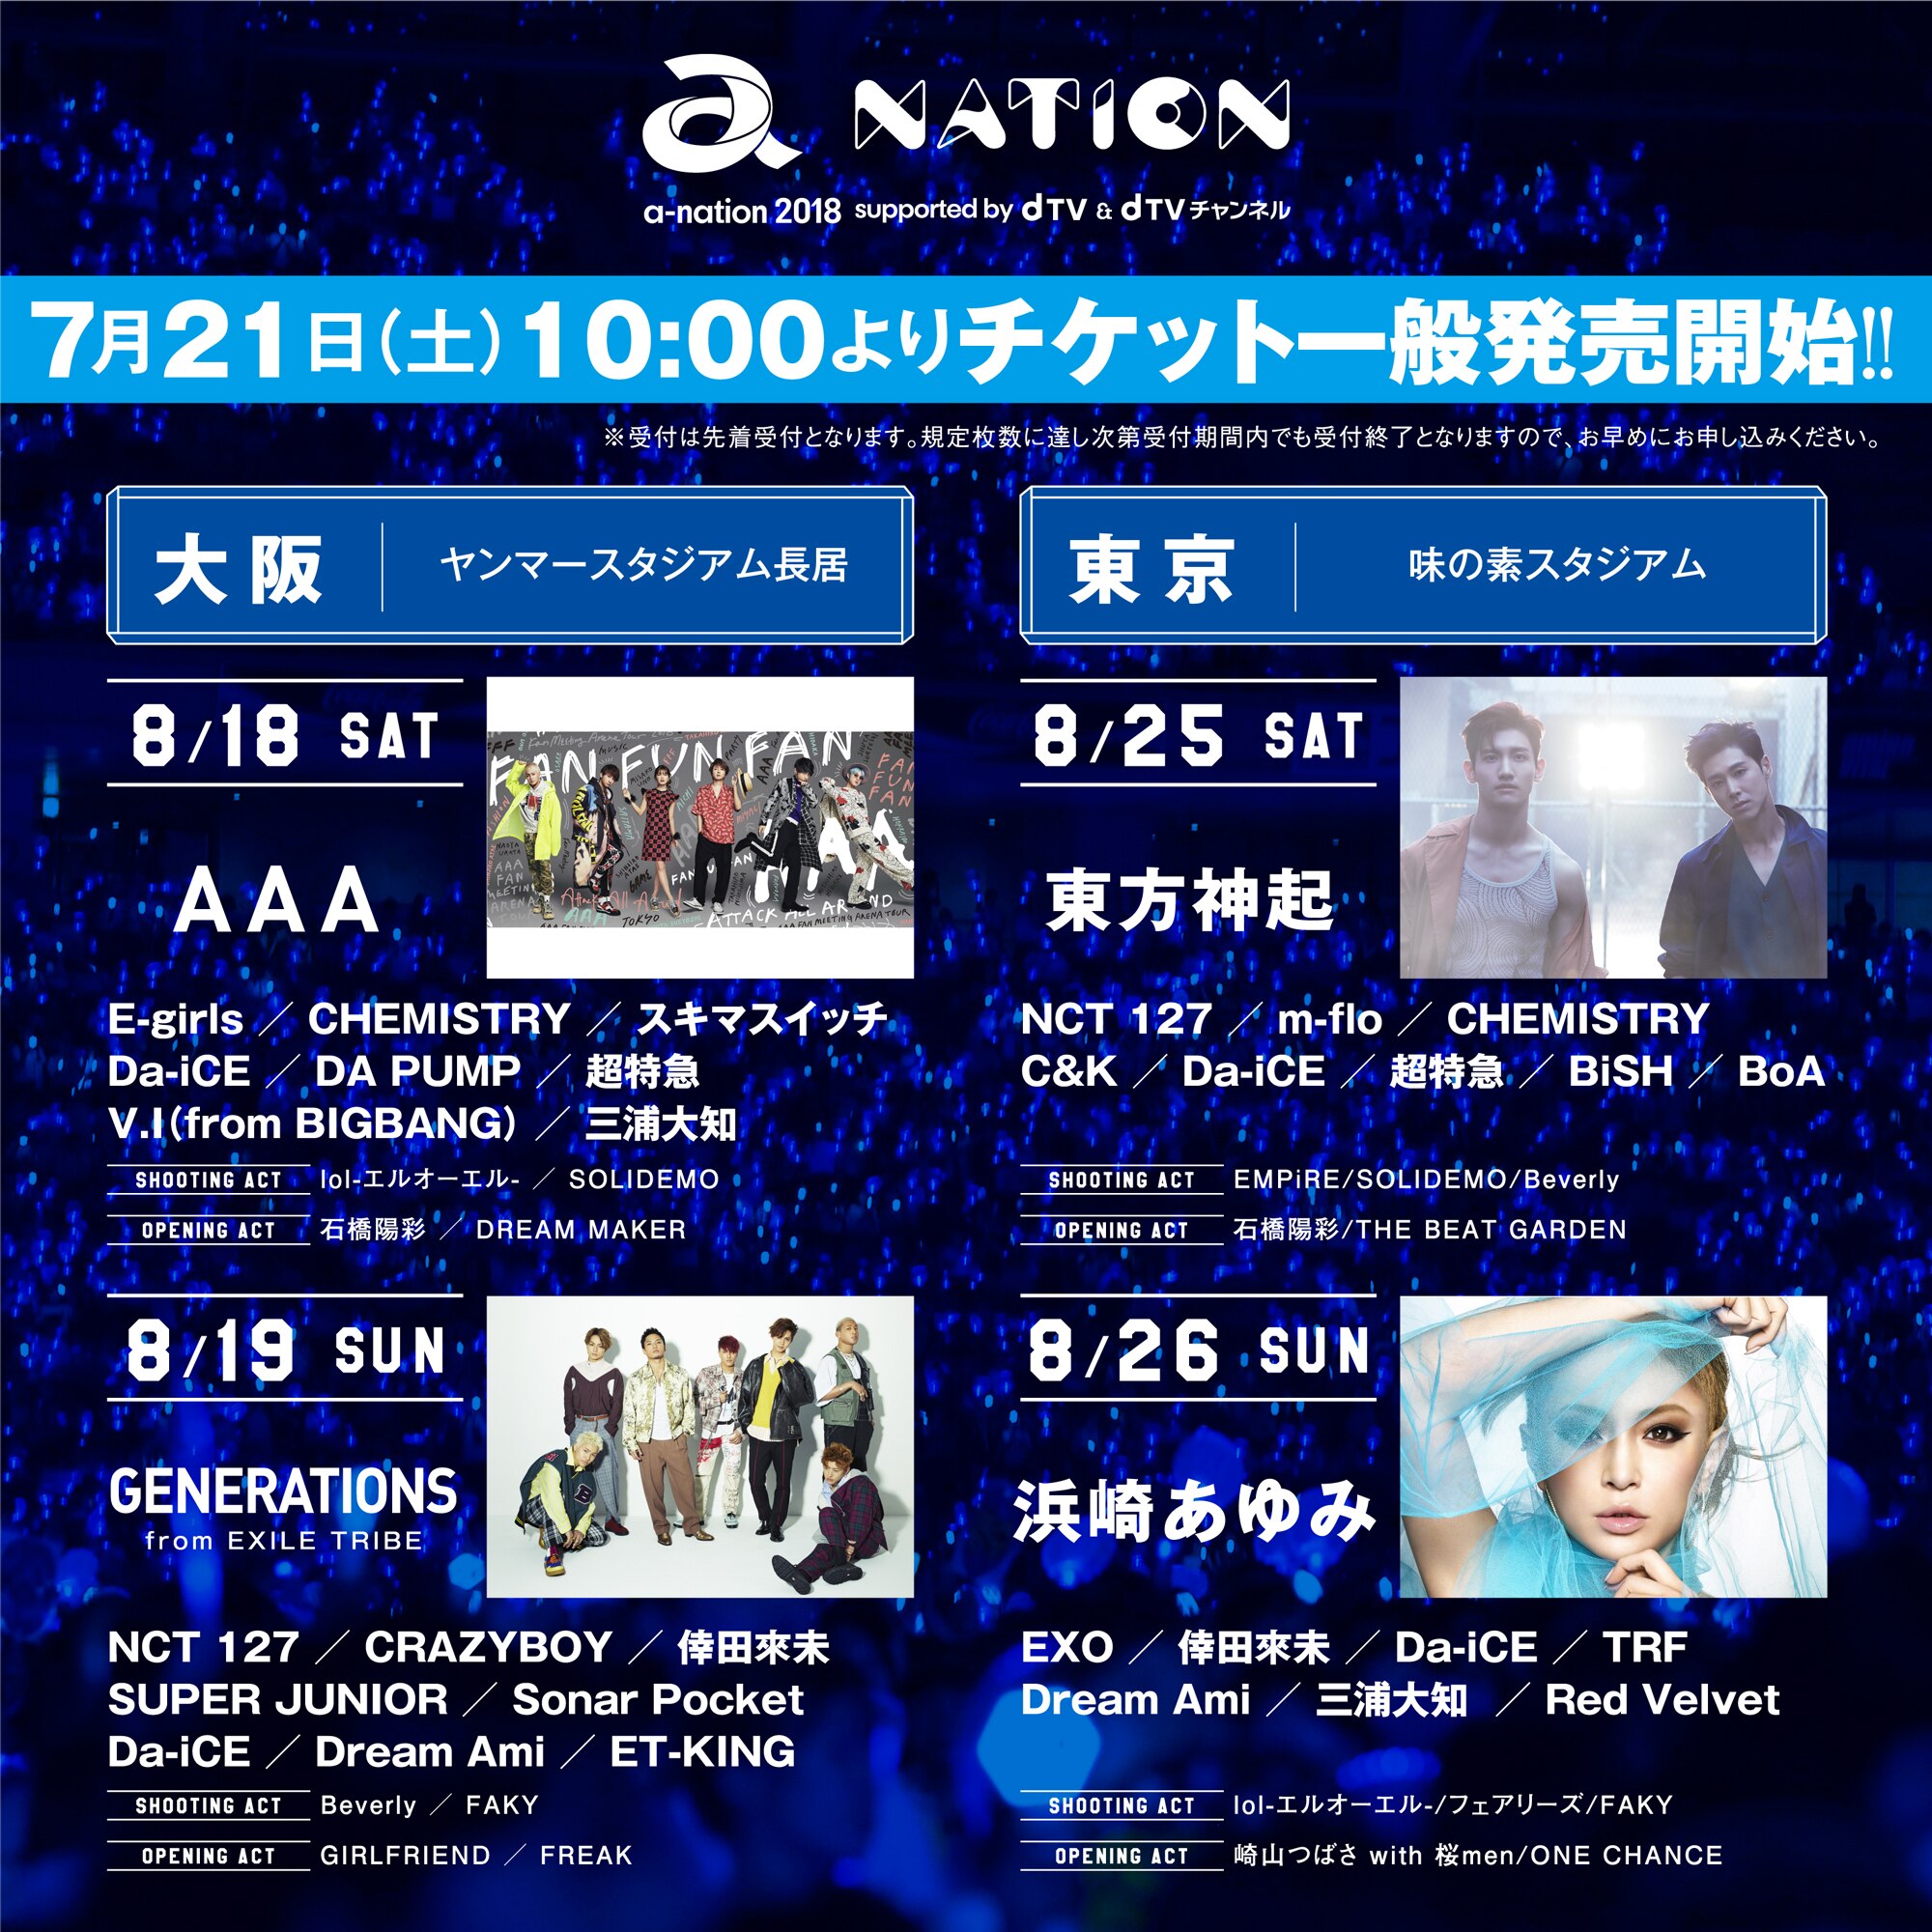 a-nation 2018 supported by dTV & dTVチャンネル】大阪、東京公演 ...